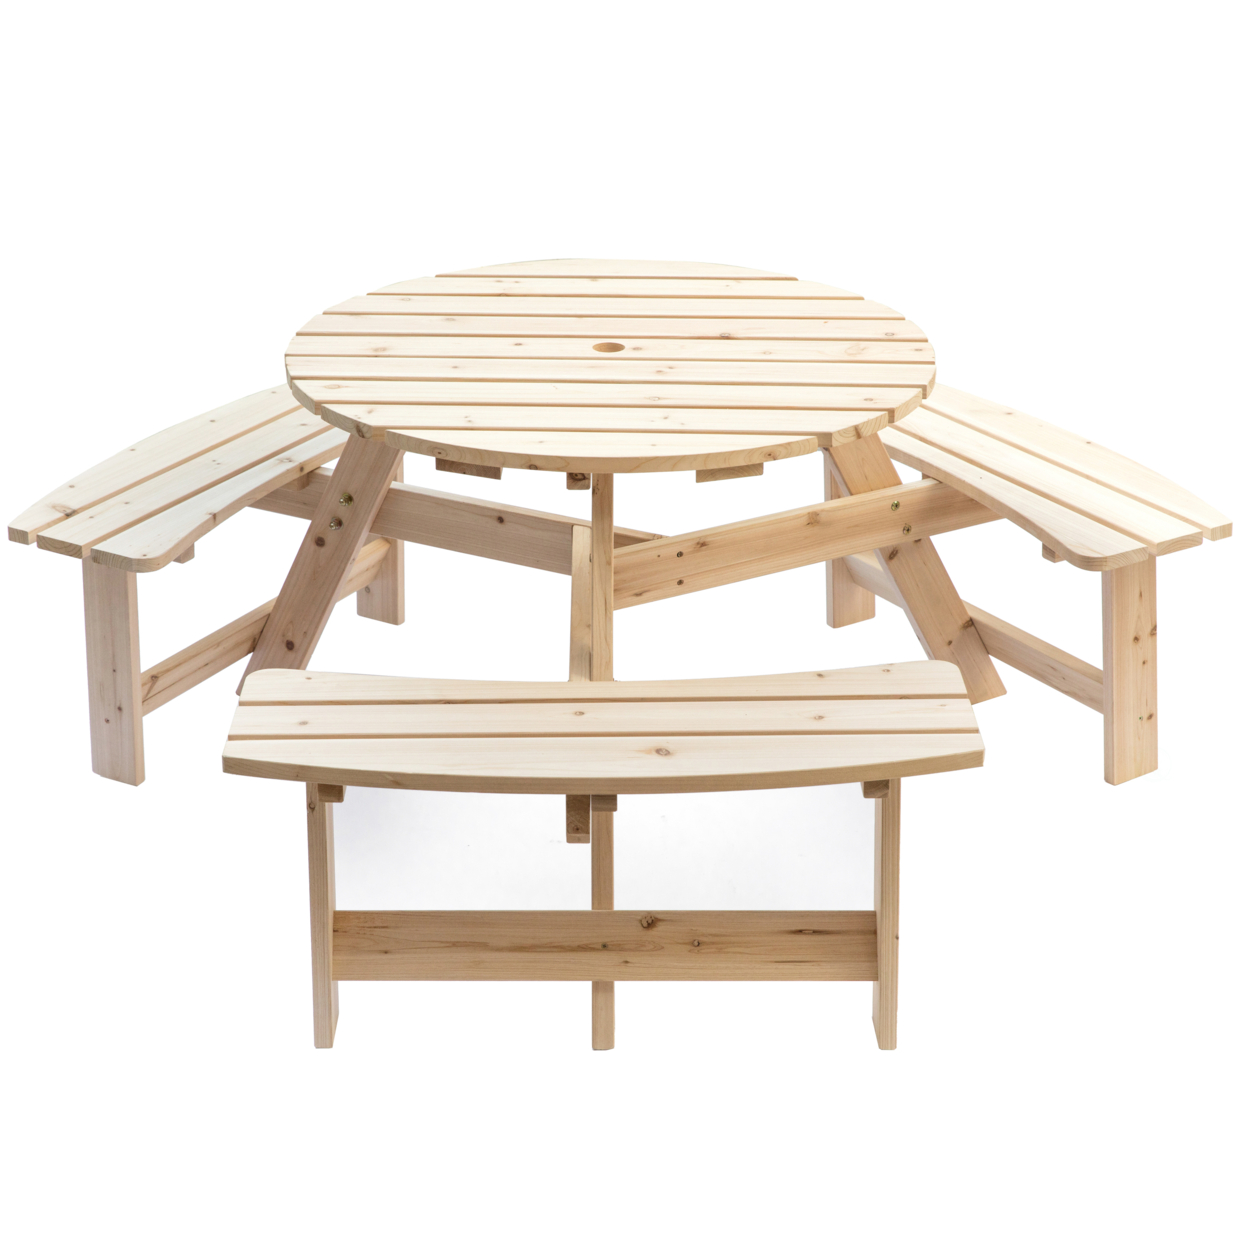 Wooden Outdoor Round Picnic Table With Bench For Patio, 6- Person With Umbrella Hole - Natural